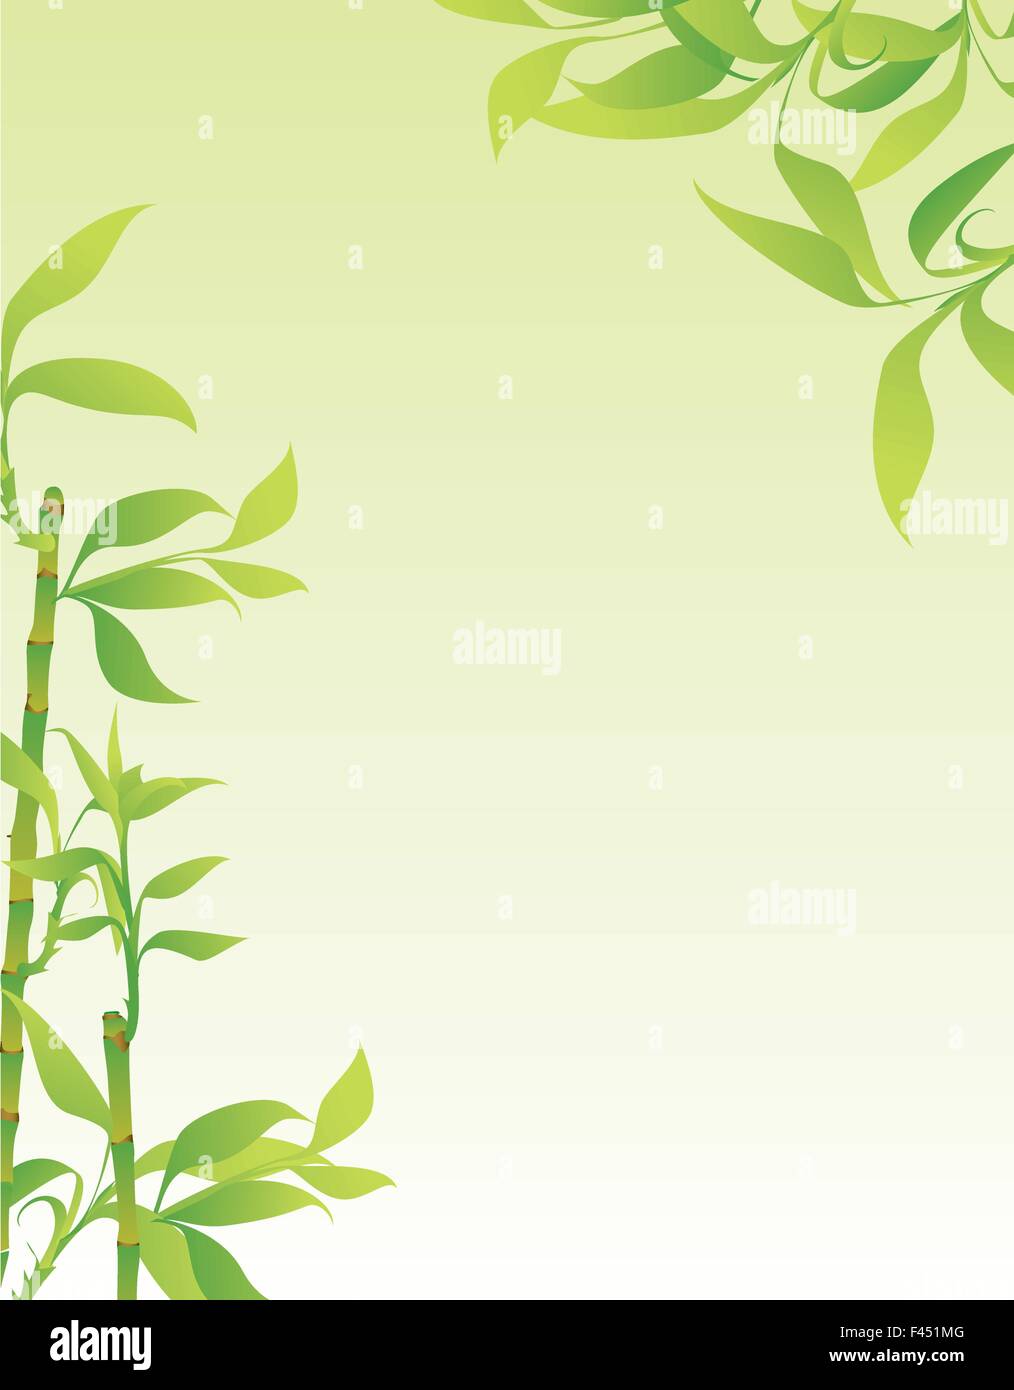 Bamboo background Stock Vector